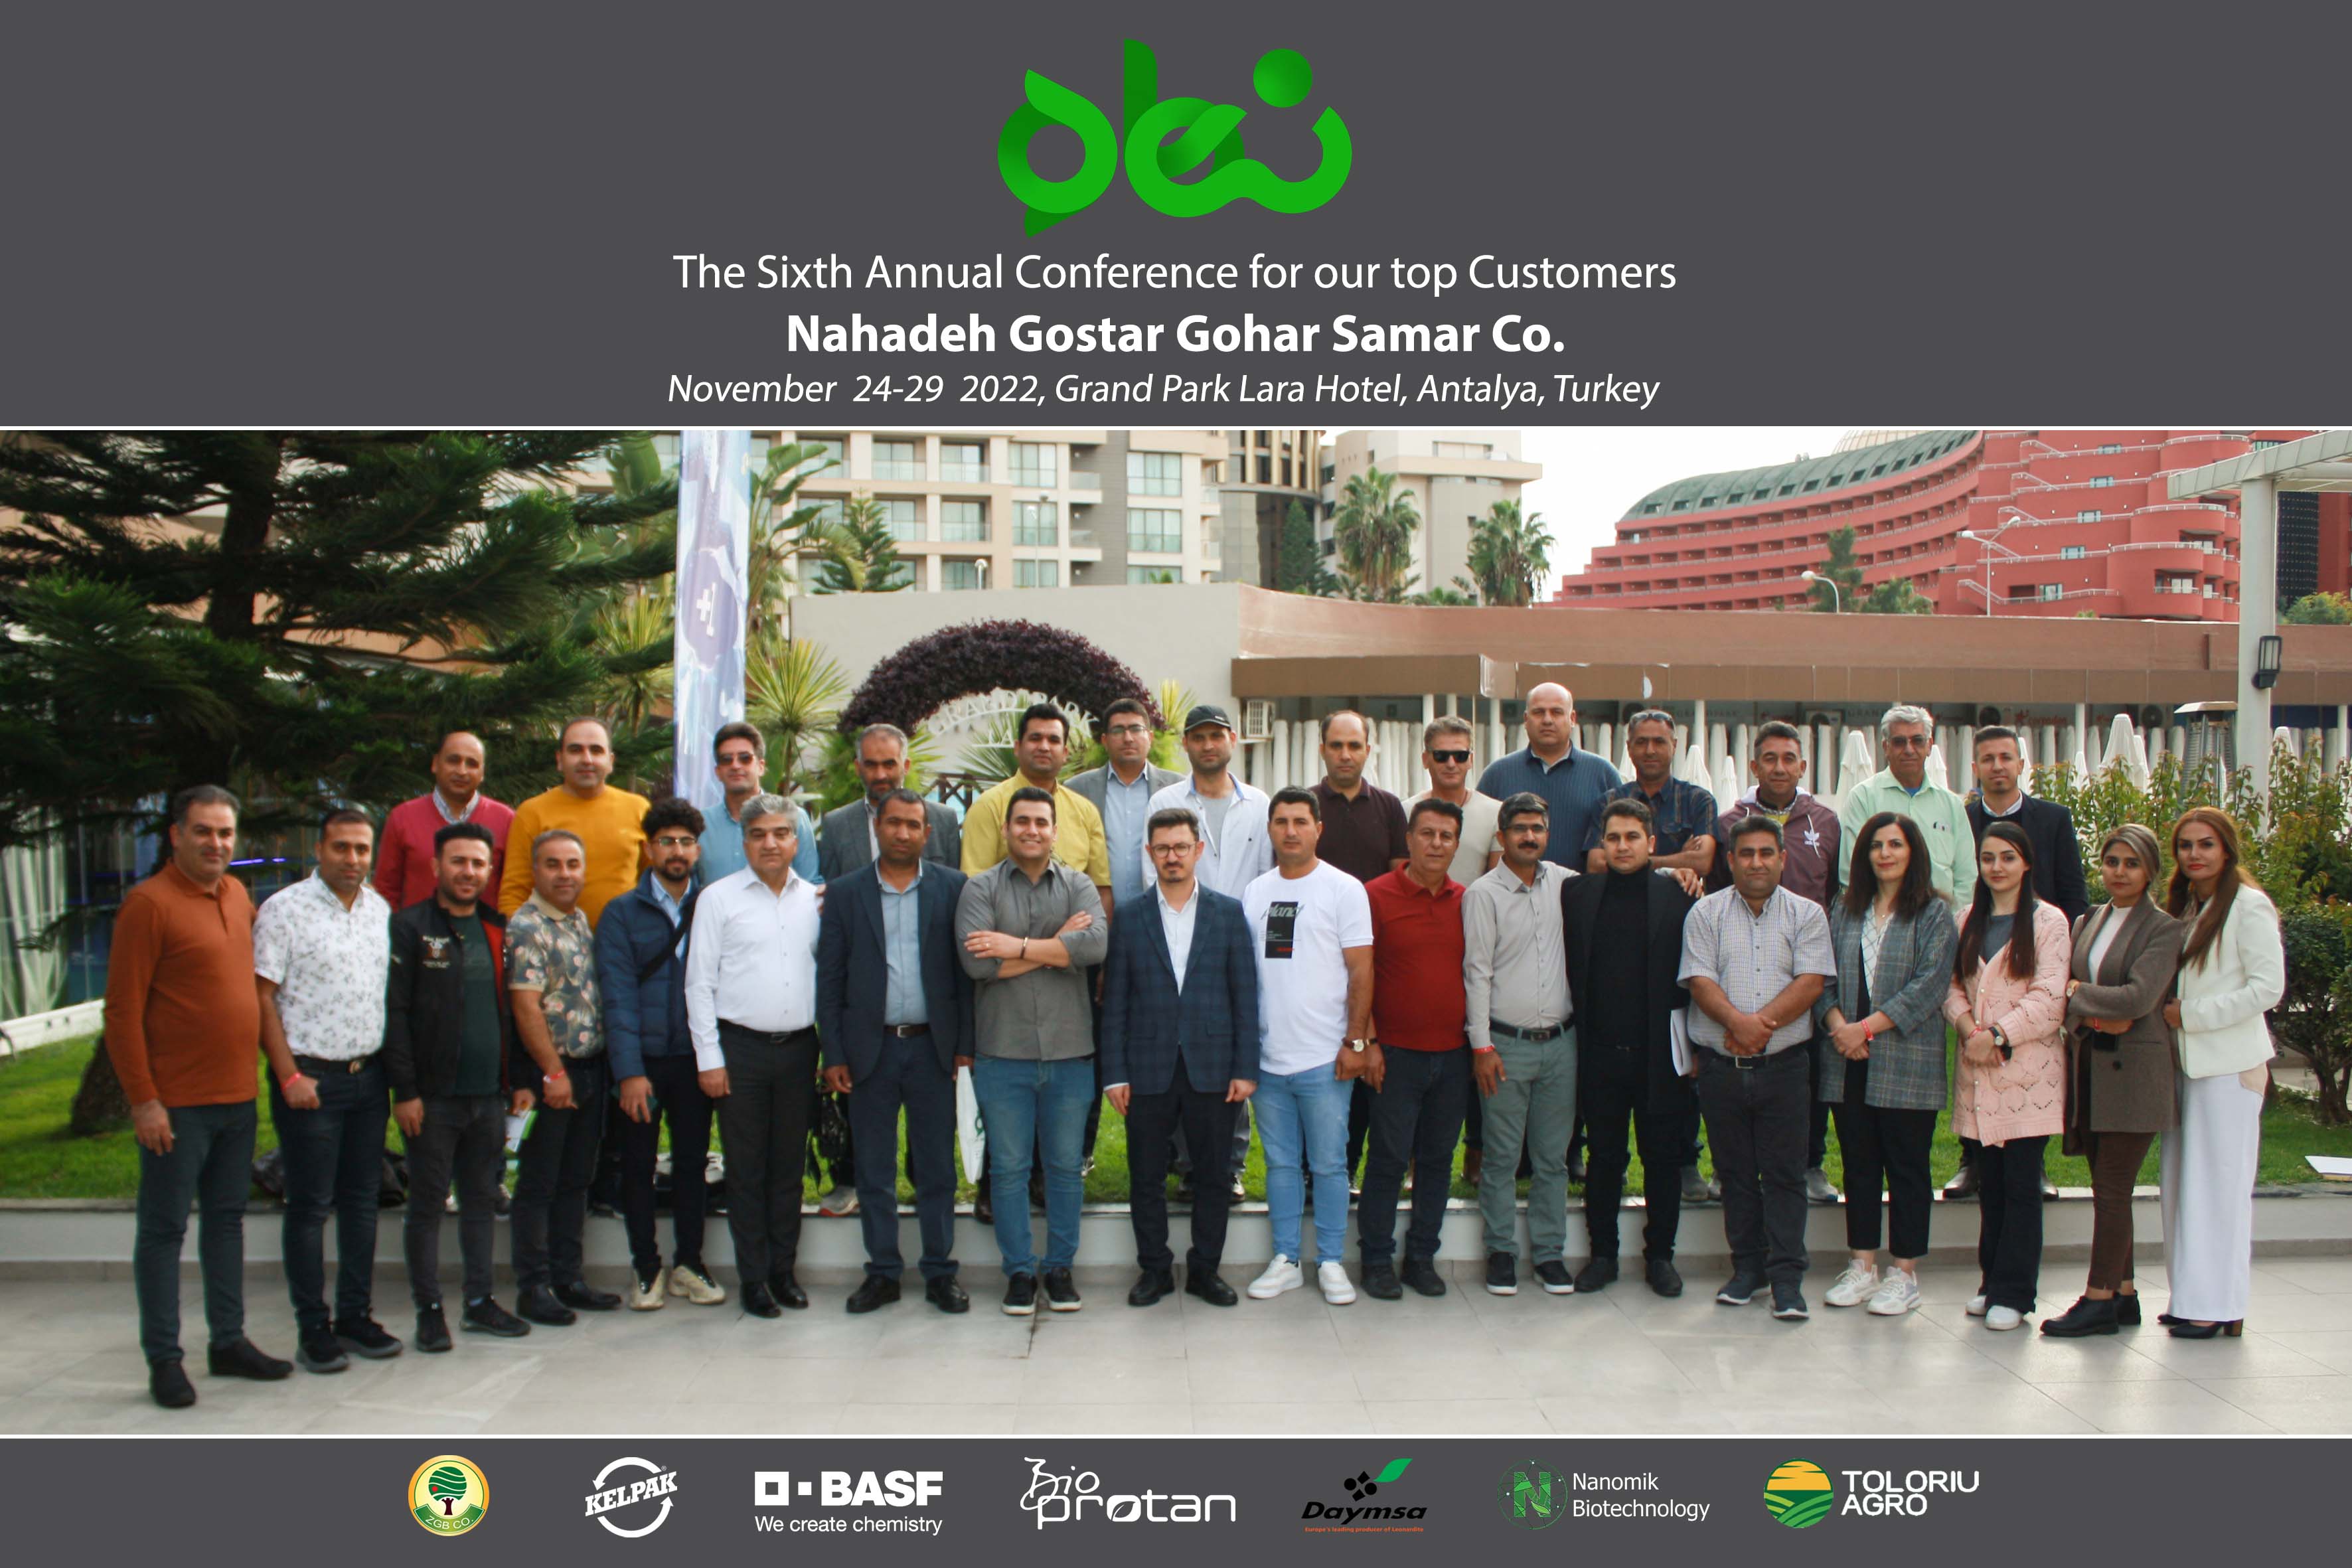 The sixth annual conference for our top customers Nahadeh Gostar Gohar Samar(1)